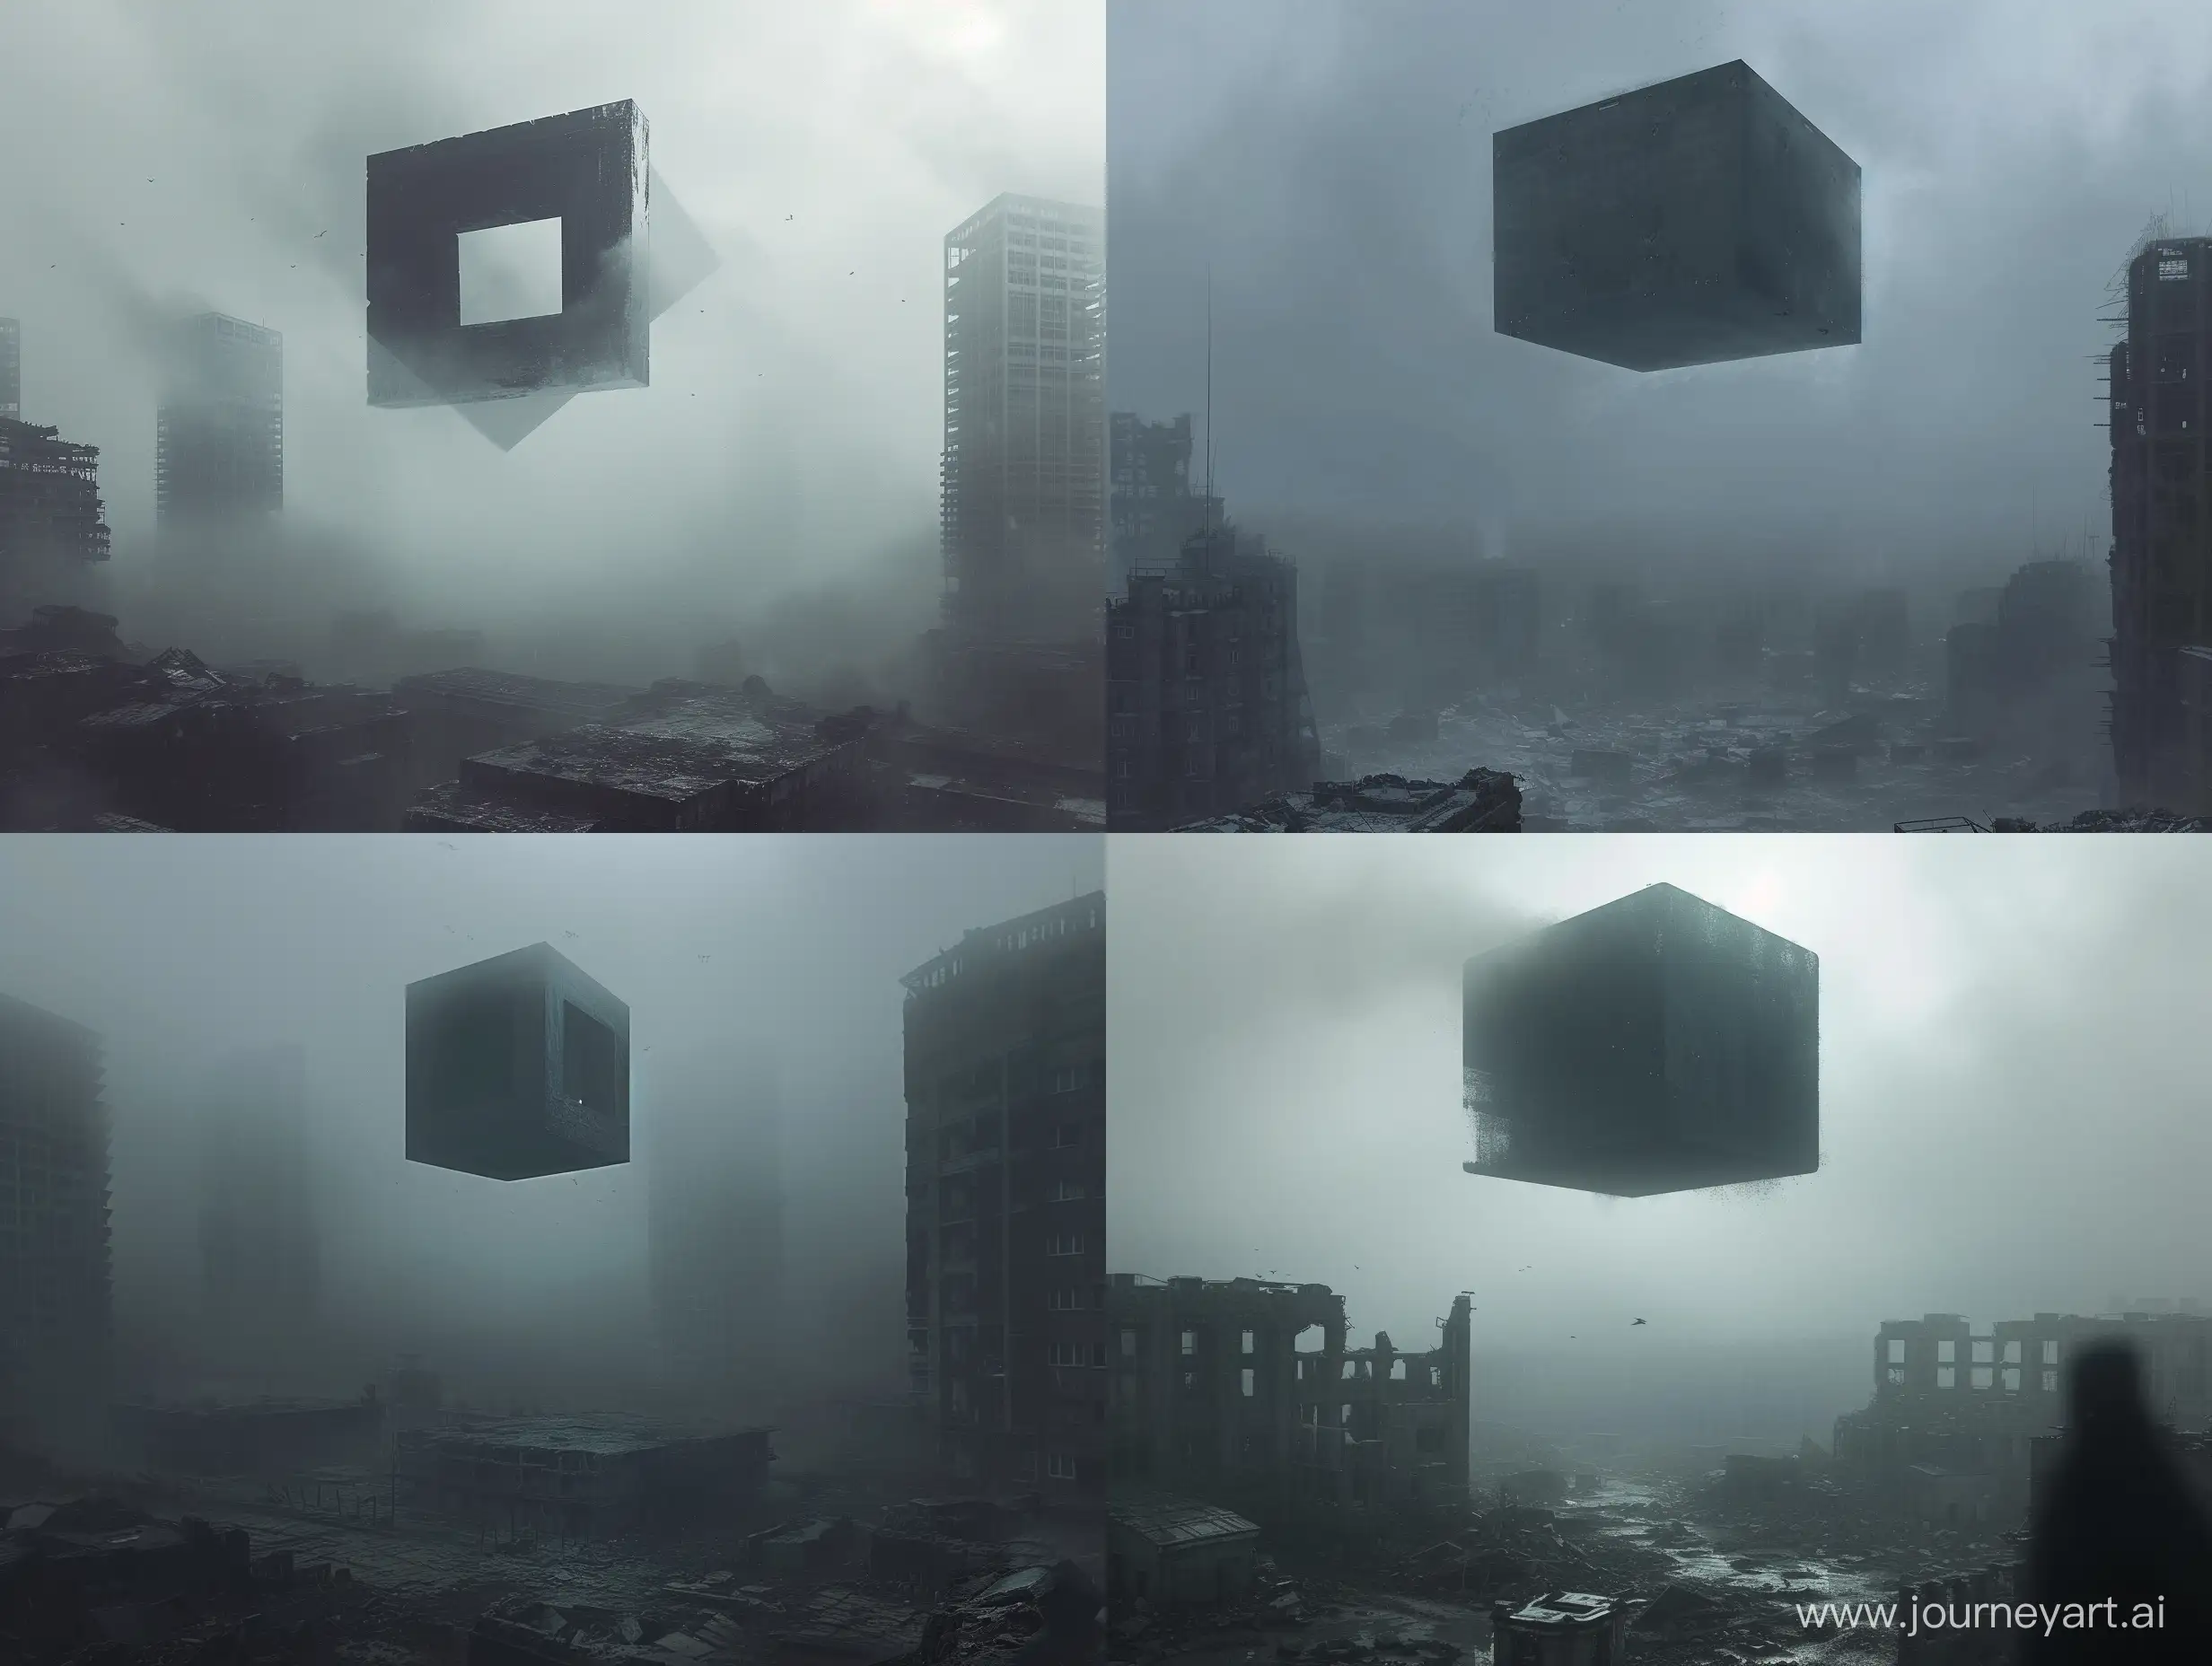 Ethereal-Bioarchitecture-Flying-Square-Object-over-City-Ruins-in-Foggy-Weather